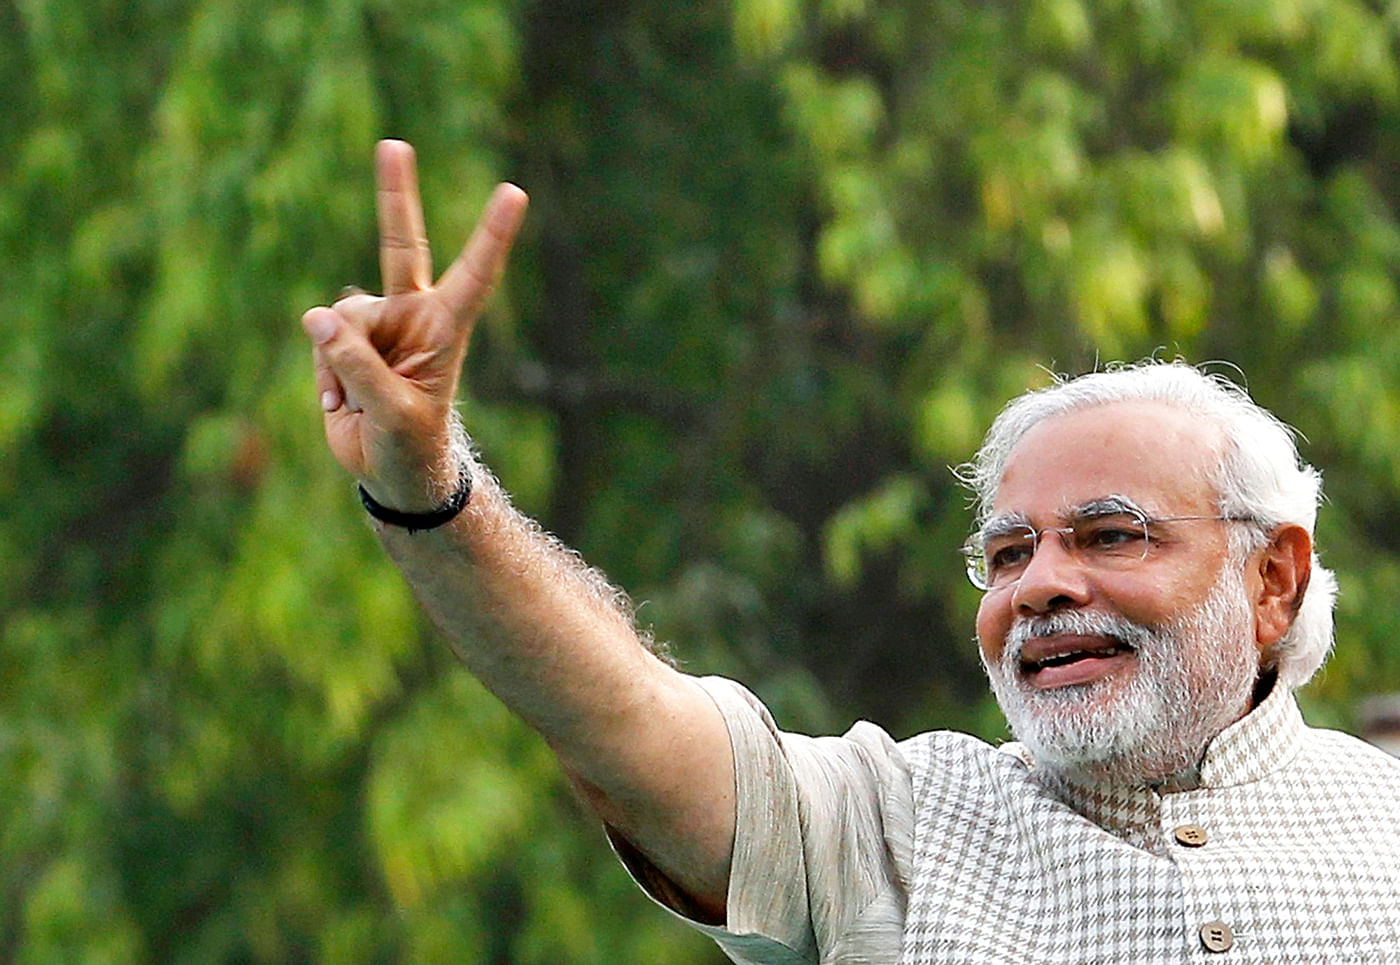 Hindu nationalist Narendra Modi, the prime ministerial candidate for India's main opposition Bharatiya Janata Party (BJP), gestures during a public meeting in Vadodra, in the western Indian state of Gujarat May 16, 2014. Photo: Reuters